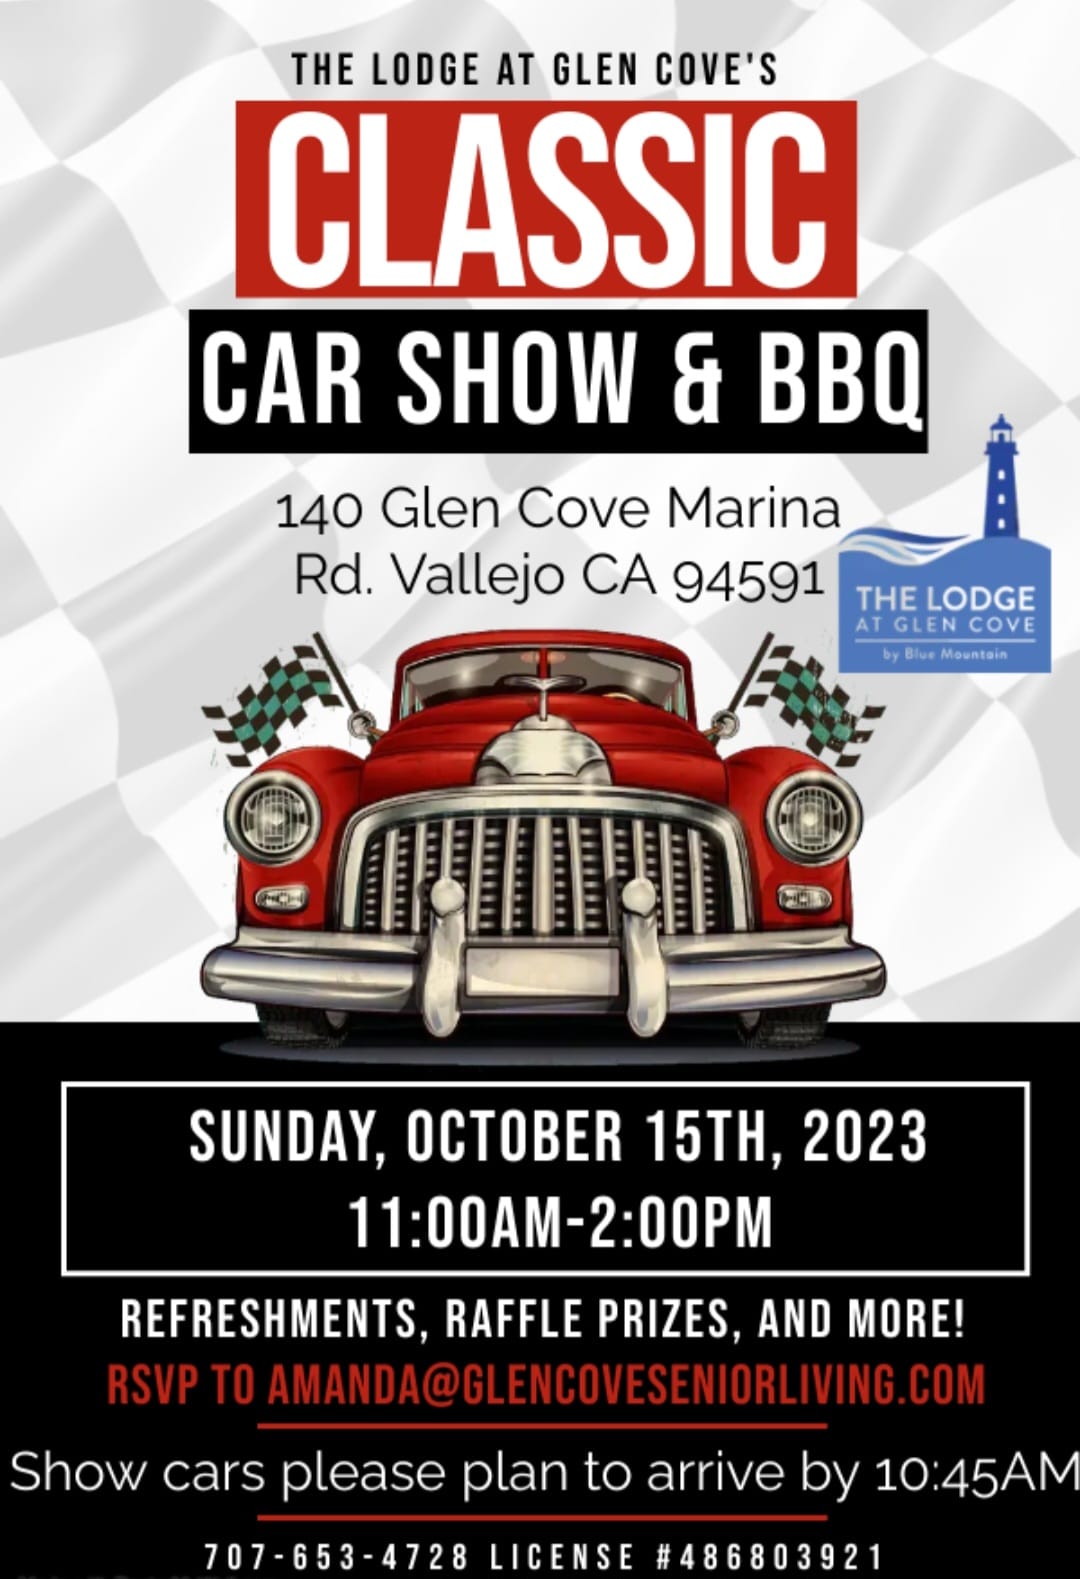 The Lodge at Glen Cove’s Classic Car Show and BBQ